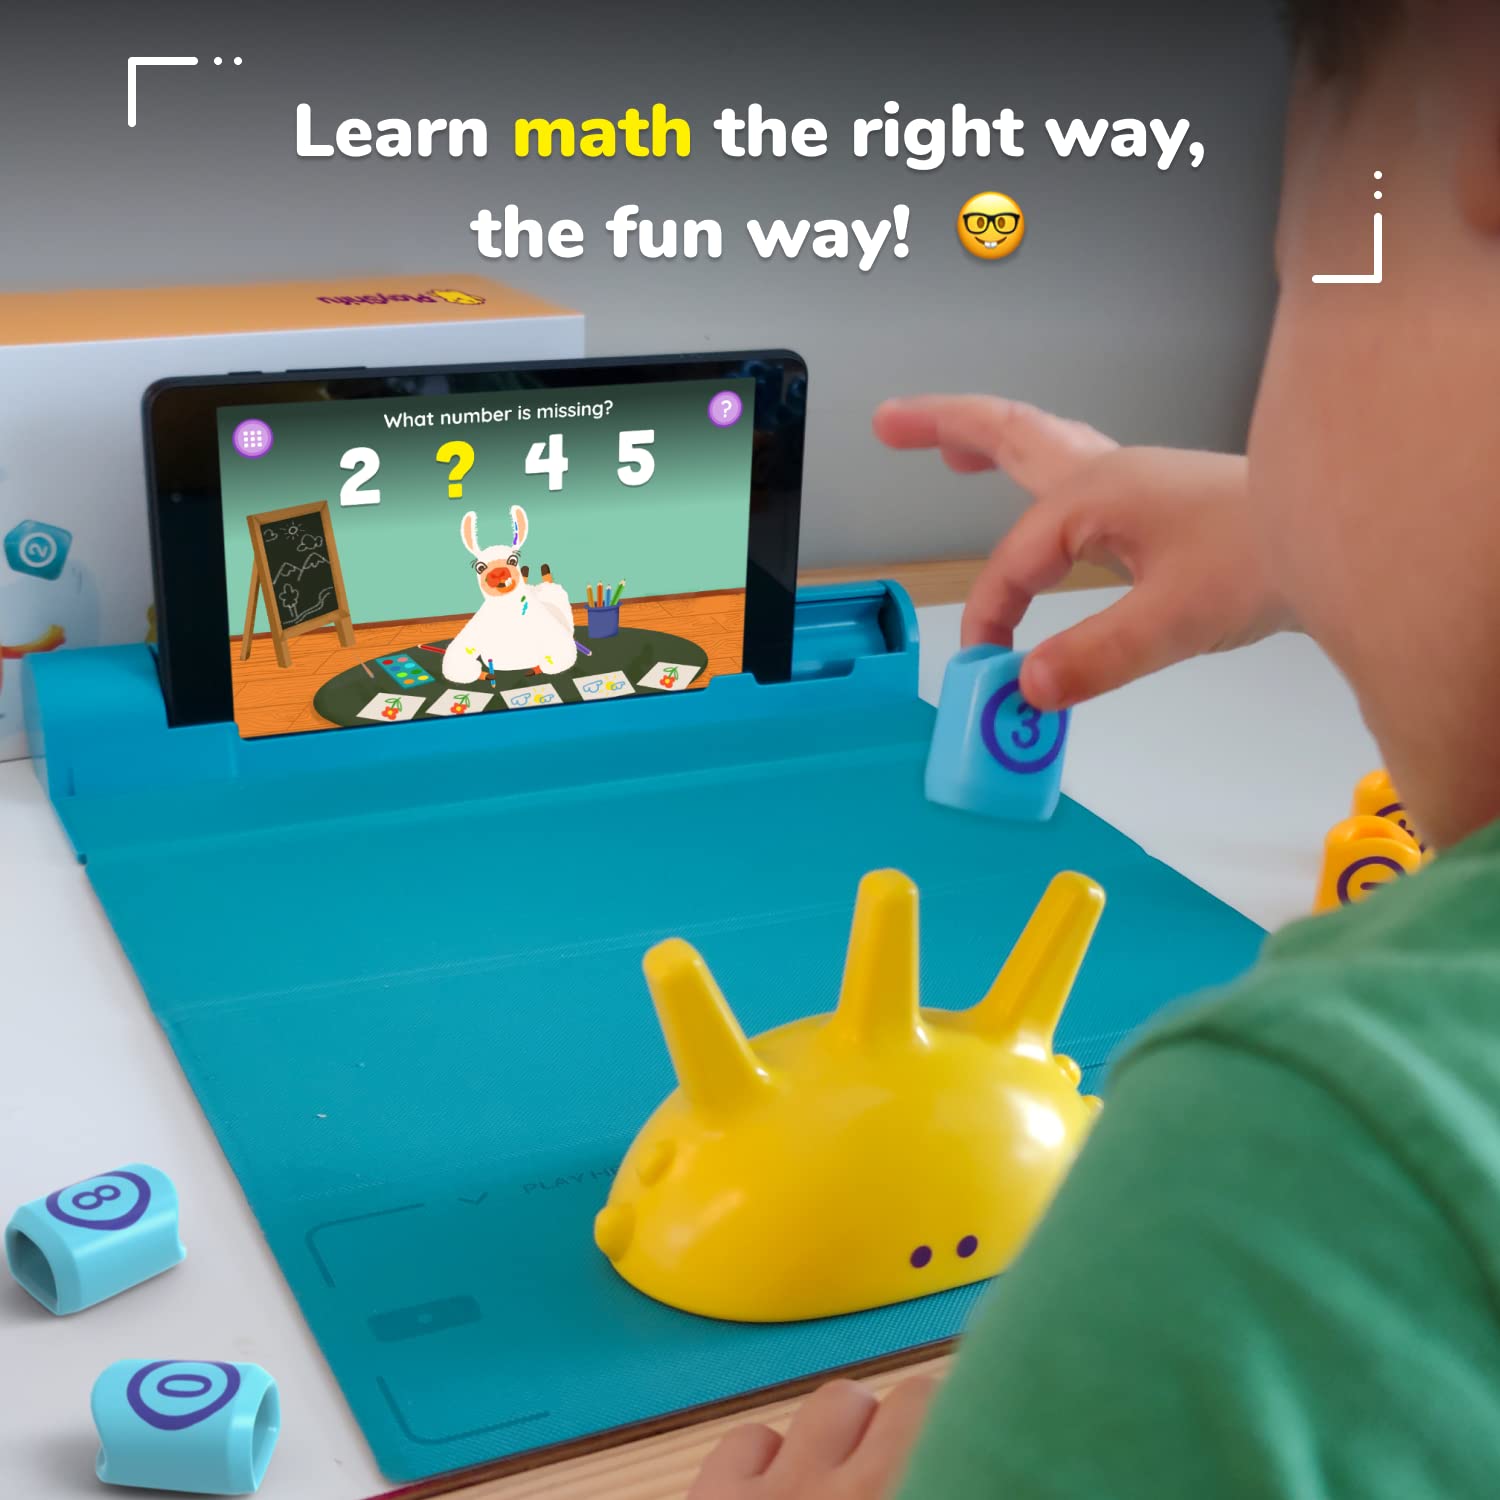 PlayShifu STEM Toy Math Game - Plugo Count (Kit + App with 5 Interactive Math Games) Educational Toy for 4 5 6 7 8 year old Birthday Gifts | Story-based Learning for Kids (Works with tabs/mobiles)